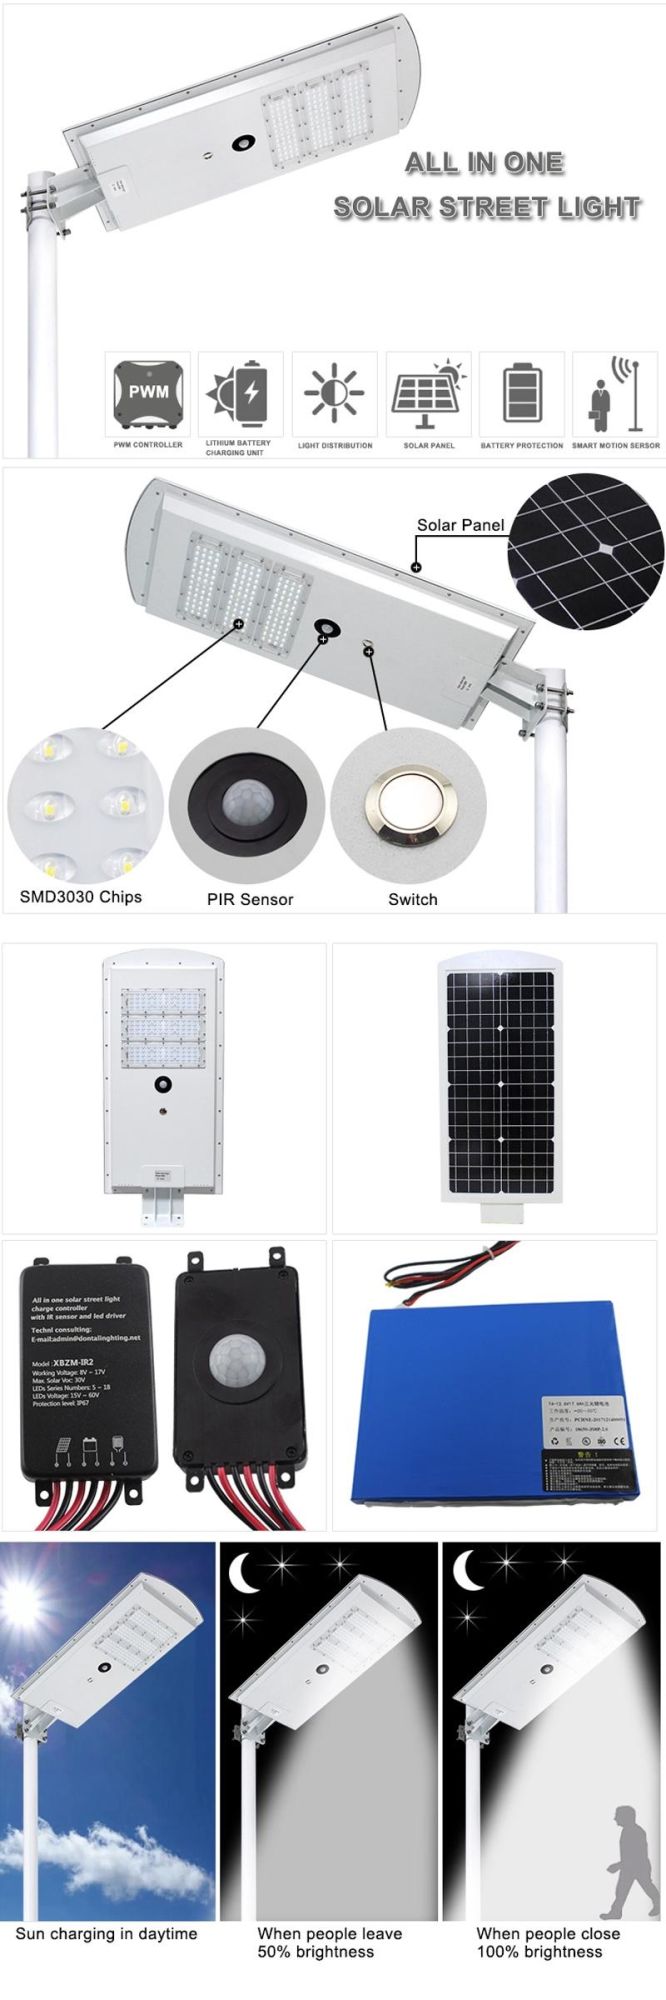 40W Bright Automatic LED Sensor Lights, Outdoor IP67 Waterproof Decoration Solar All in One Street Lighting, Smart Energy Saving Square Road Lamps